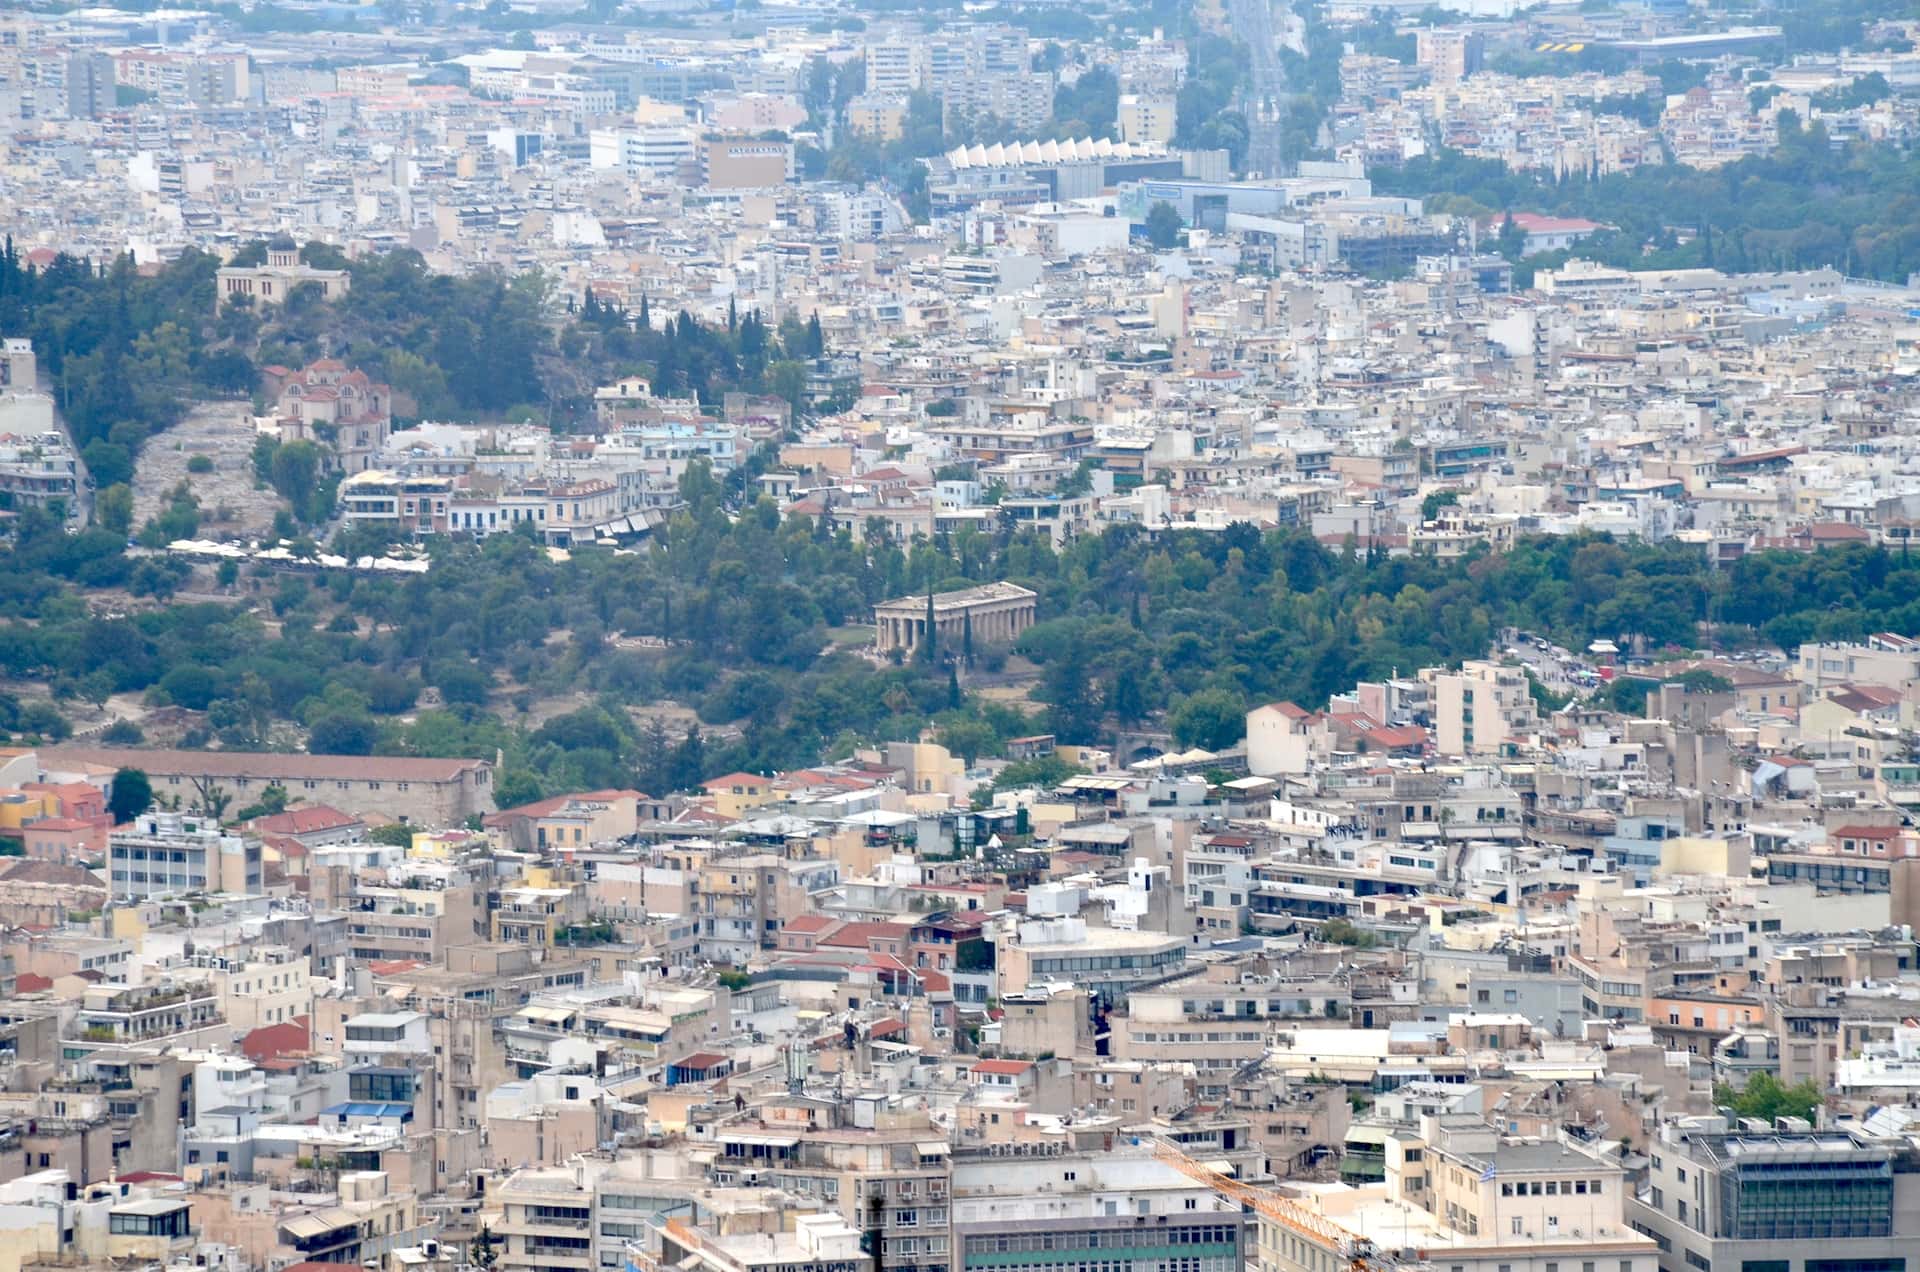 Temple of Hephaestus and the ancient Agora from Lycabettus Hill in Athens, Greece